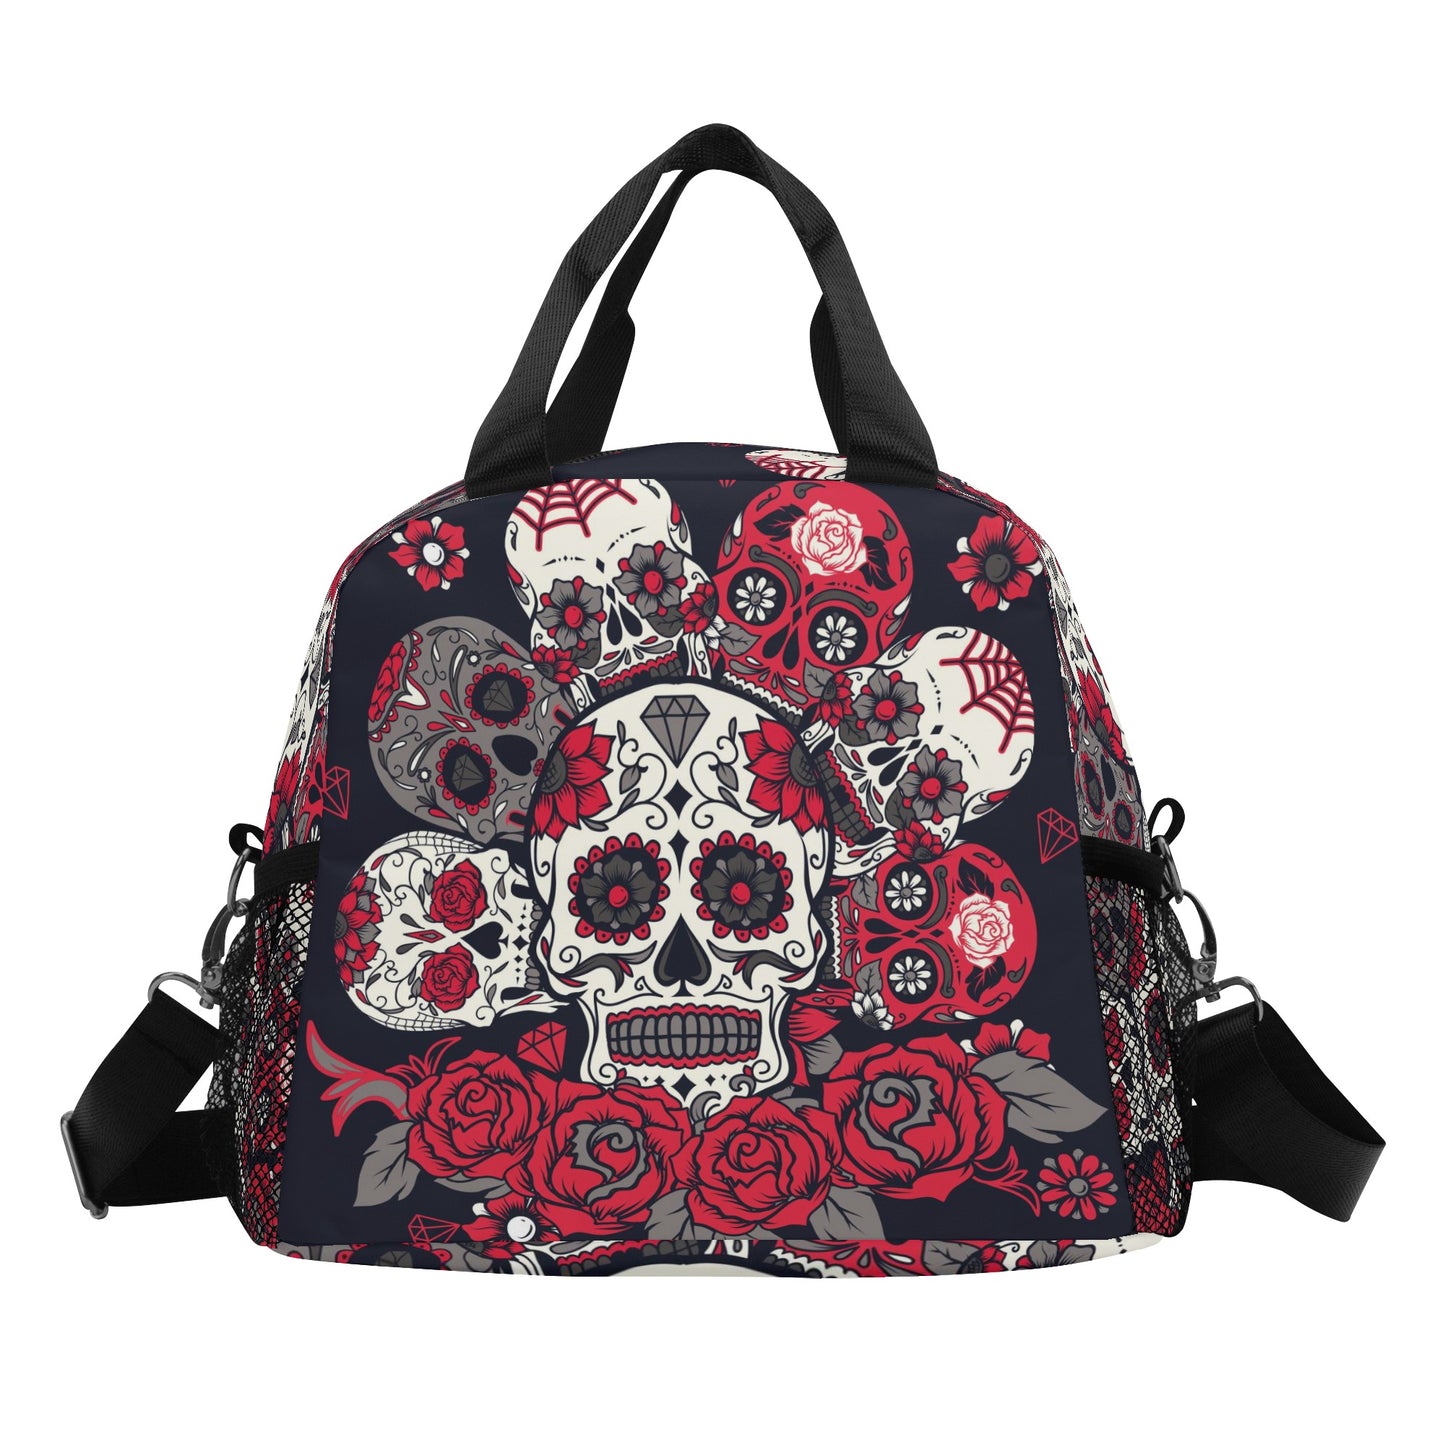 All Floral sugar skull pattern Over Printing Lunch Bag